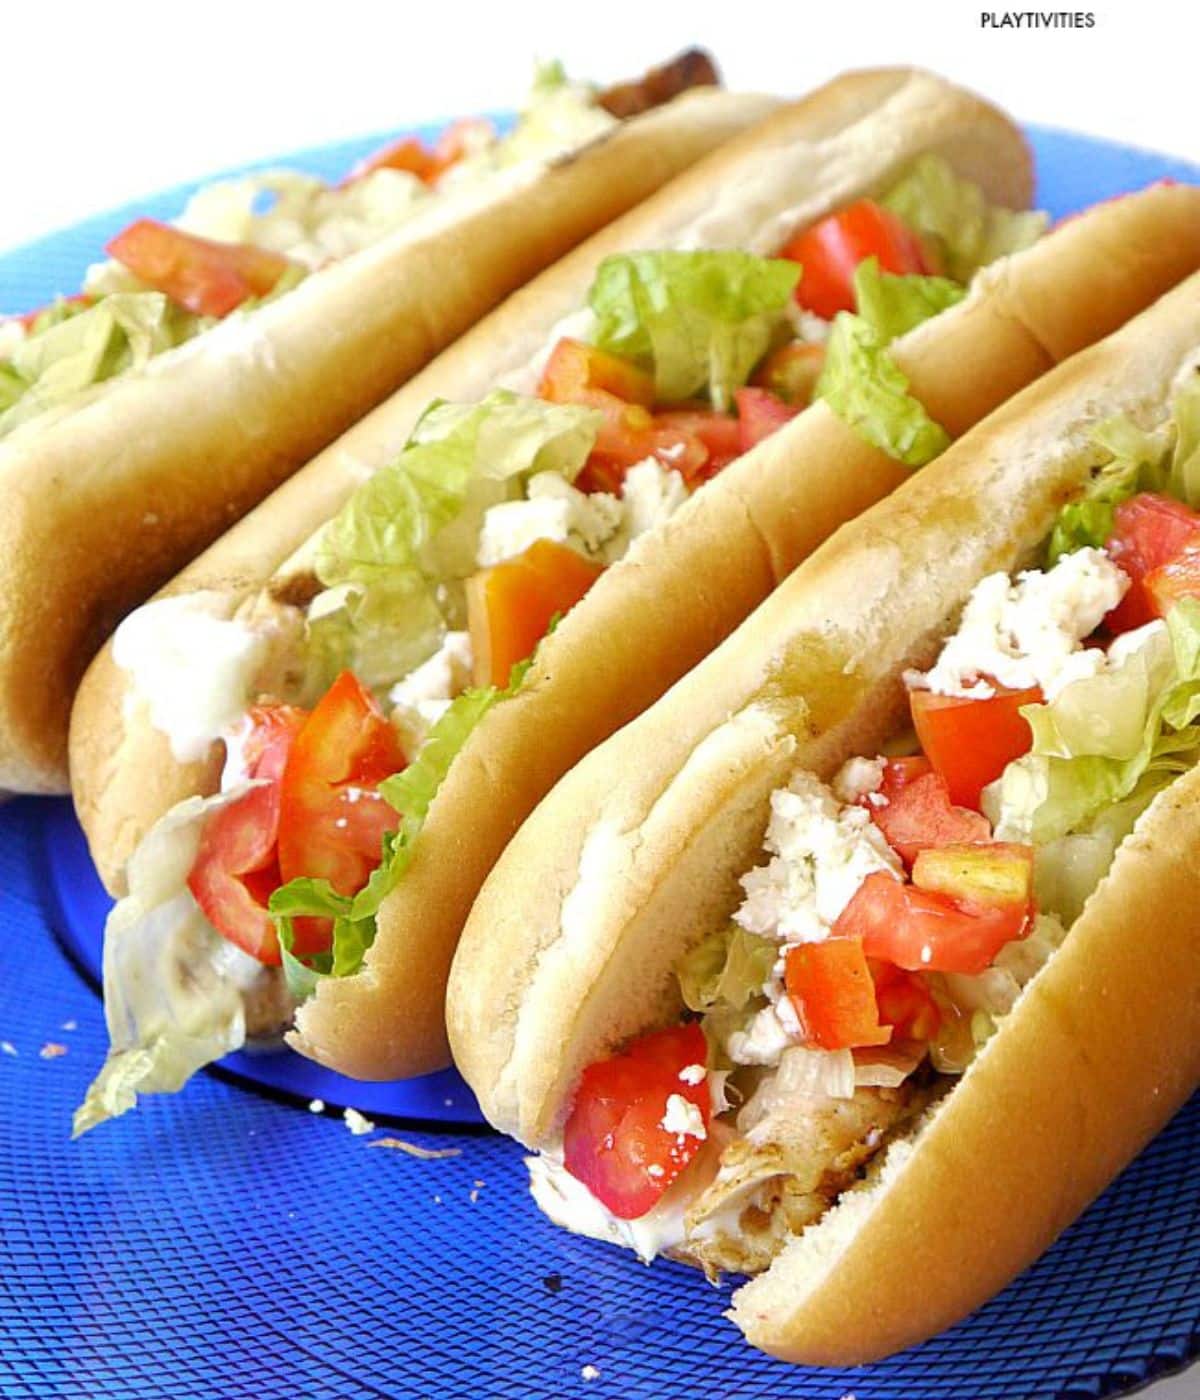 Three grilled chicken hot dogs on a blue plate.